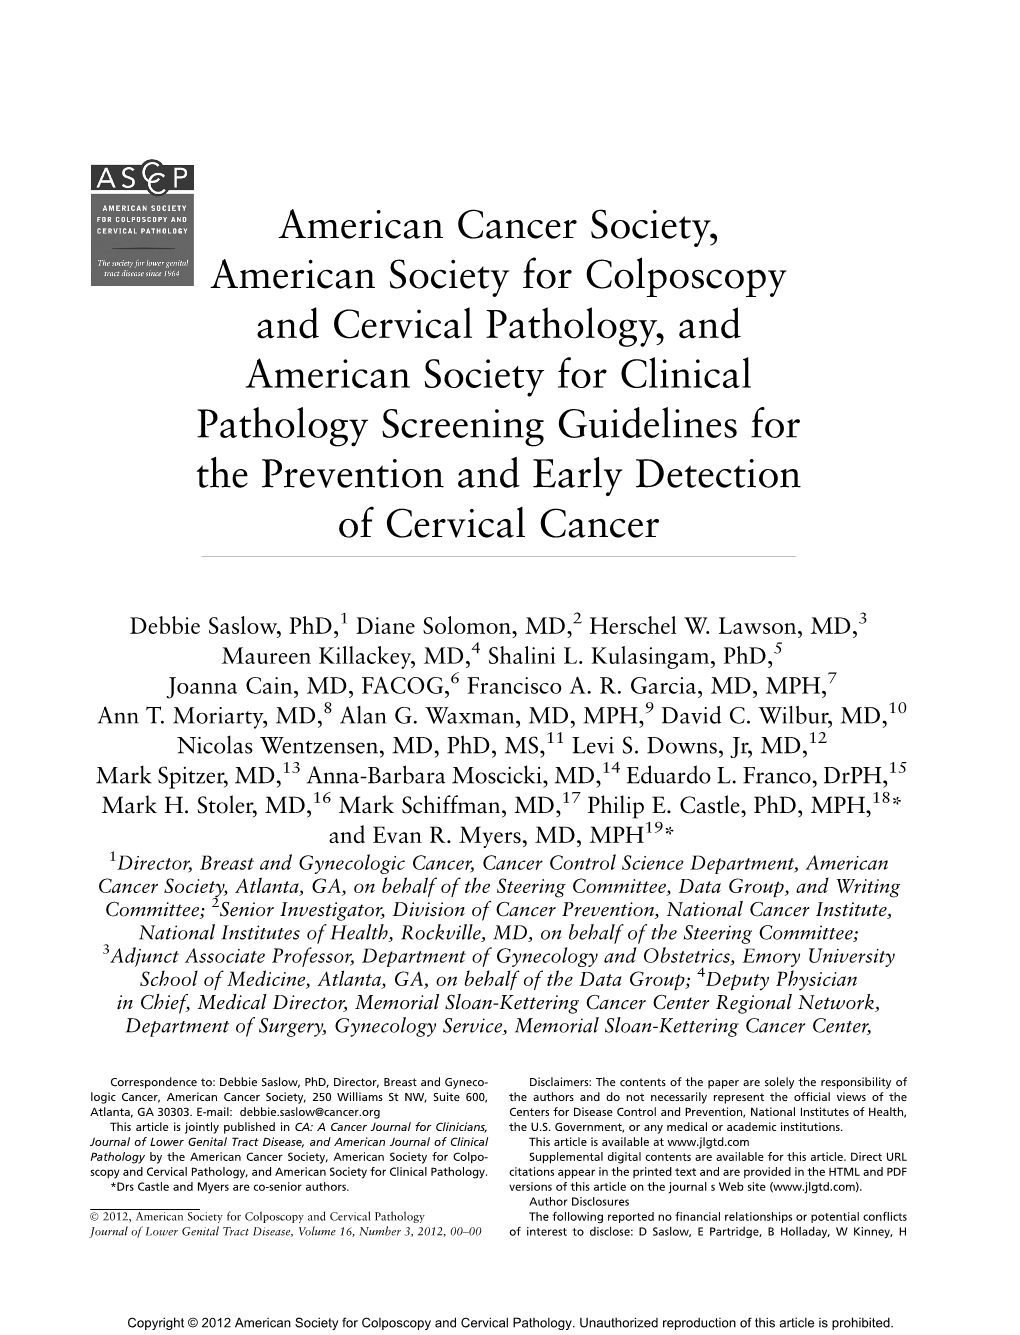 American Society for Colposcopy and Cervical Pathology